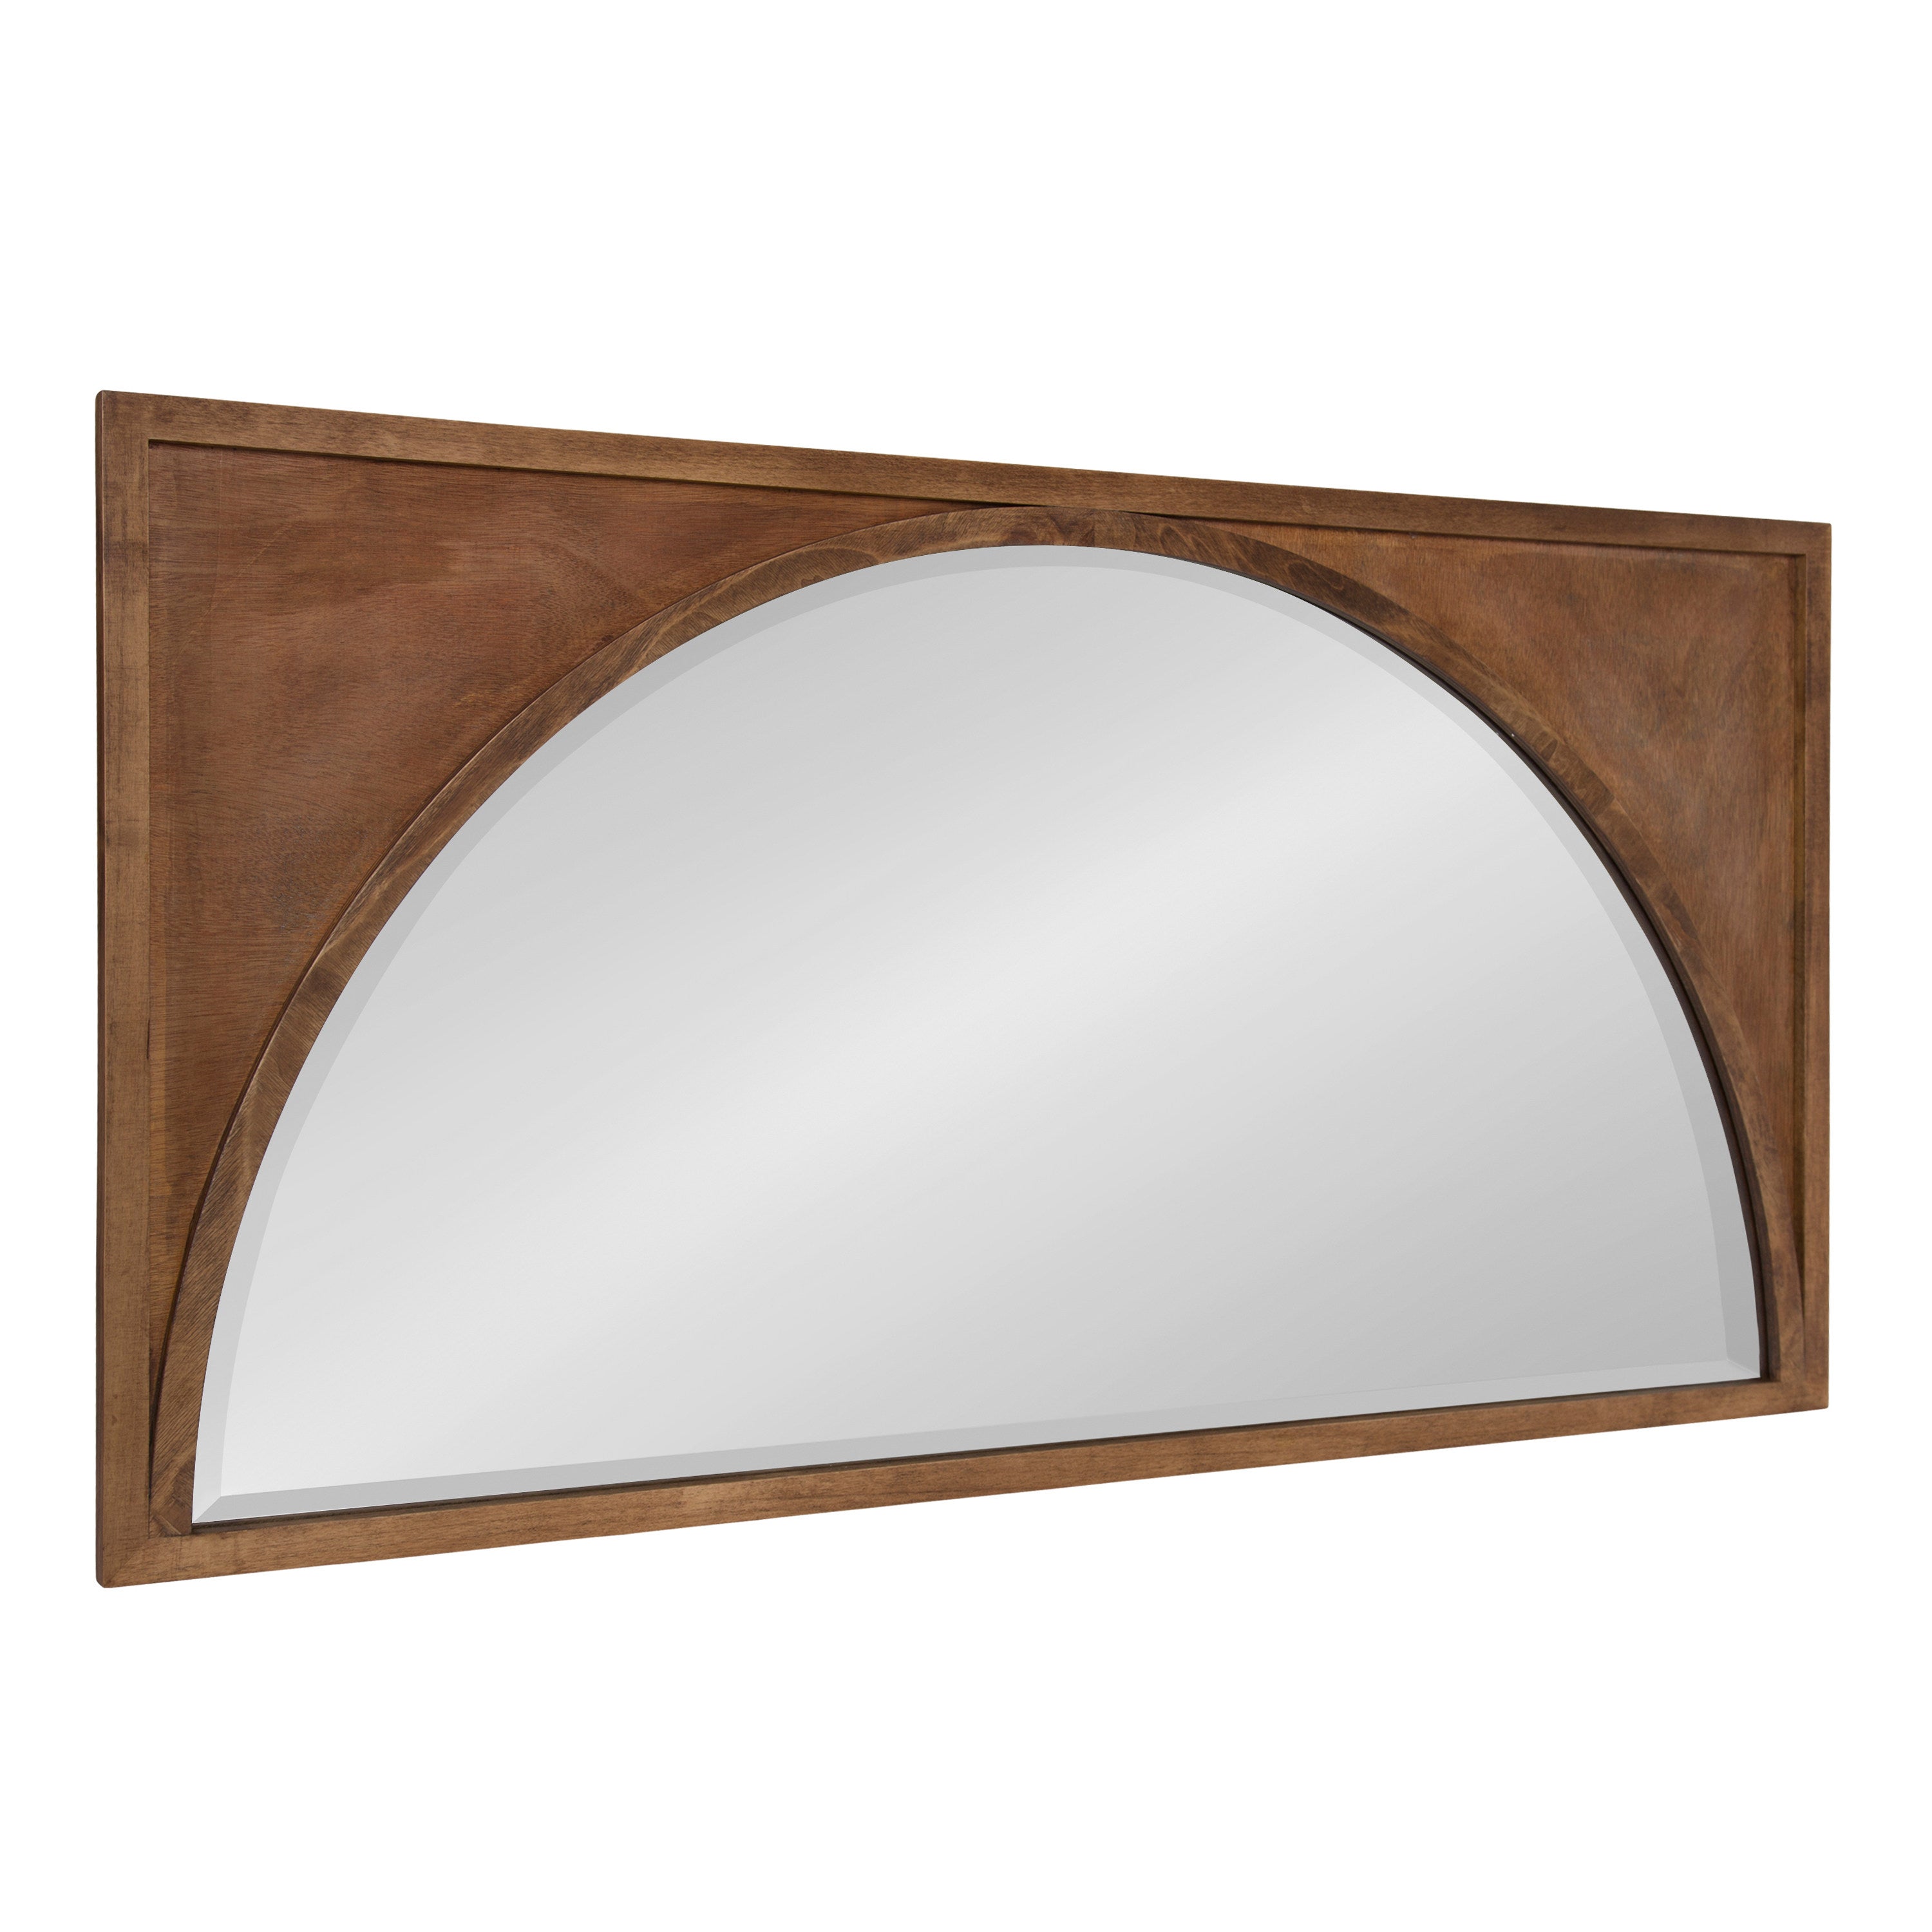 Andover Wooden Wall Panel Arch Mirror